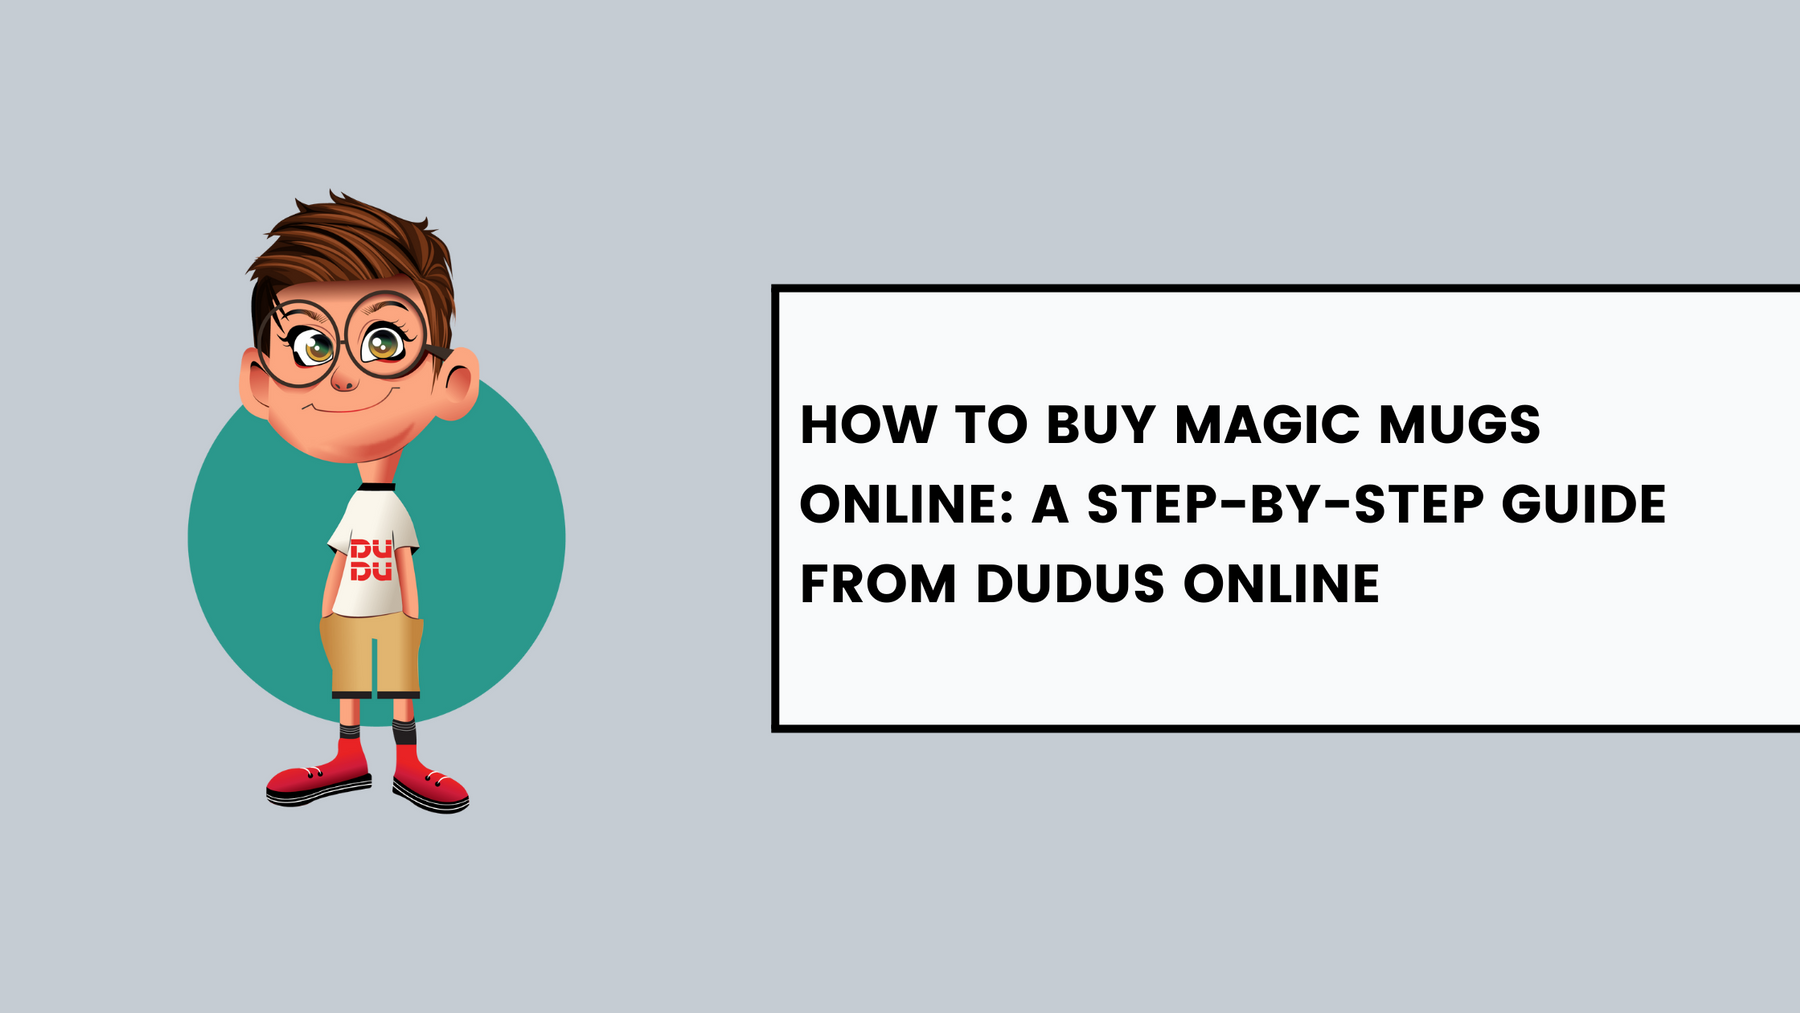 How to Buy Magic Mugs Online: A Step-by-Step Guide from Dudus Online